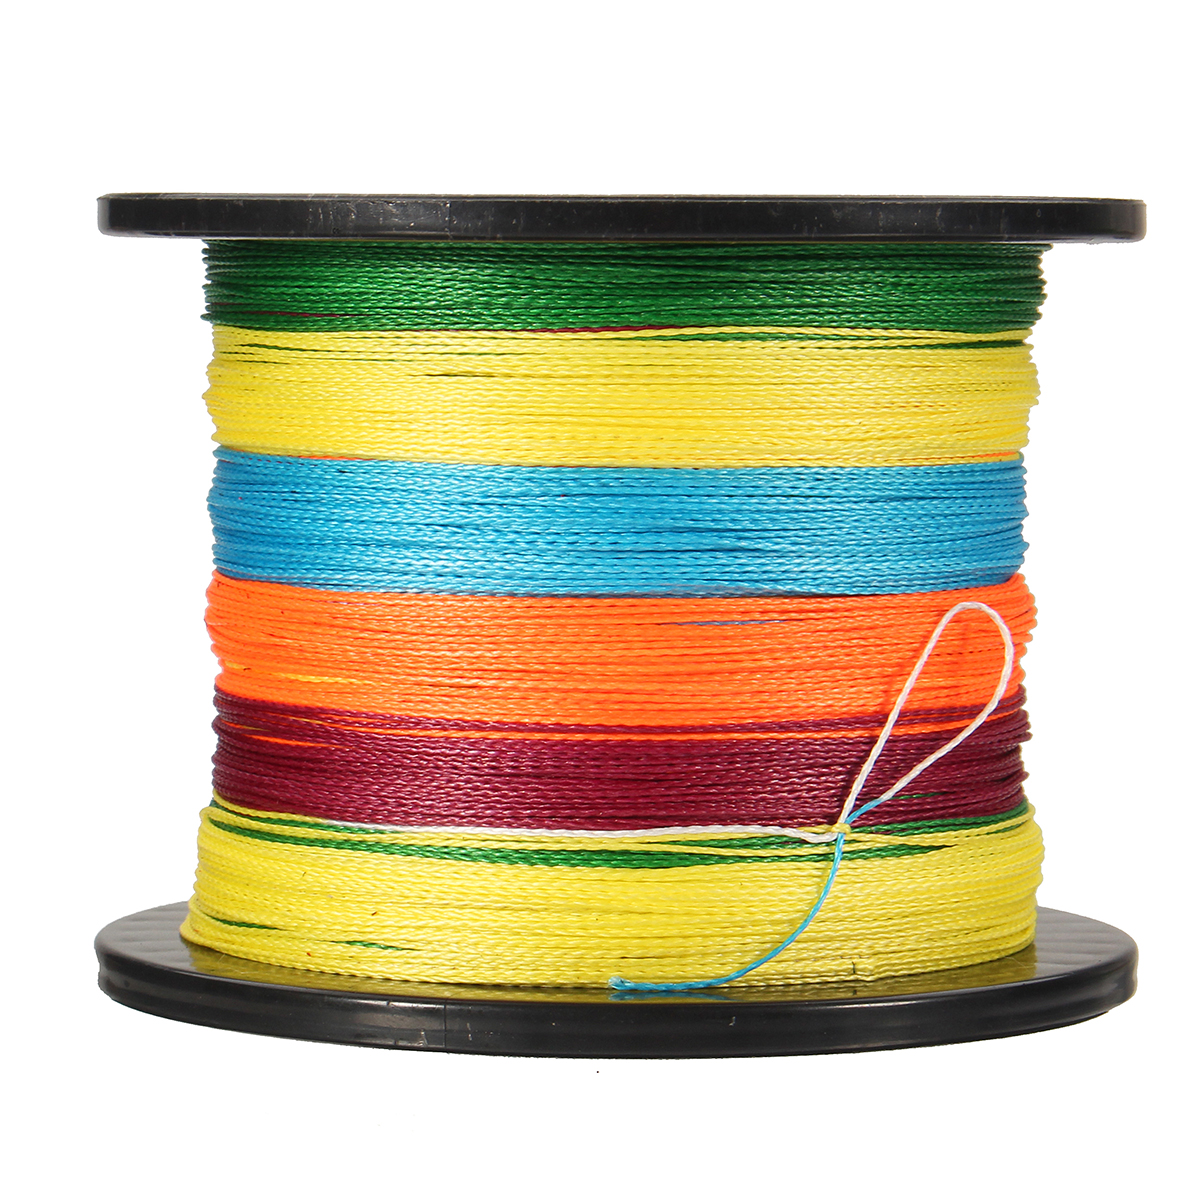 Zanlure-Multicolor-547-Yards-500M-12-72LB-4-Strands-PE-Braided-Fishing-Line-Wire-Outdoor-Sea-Fishing-1638563-7